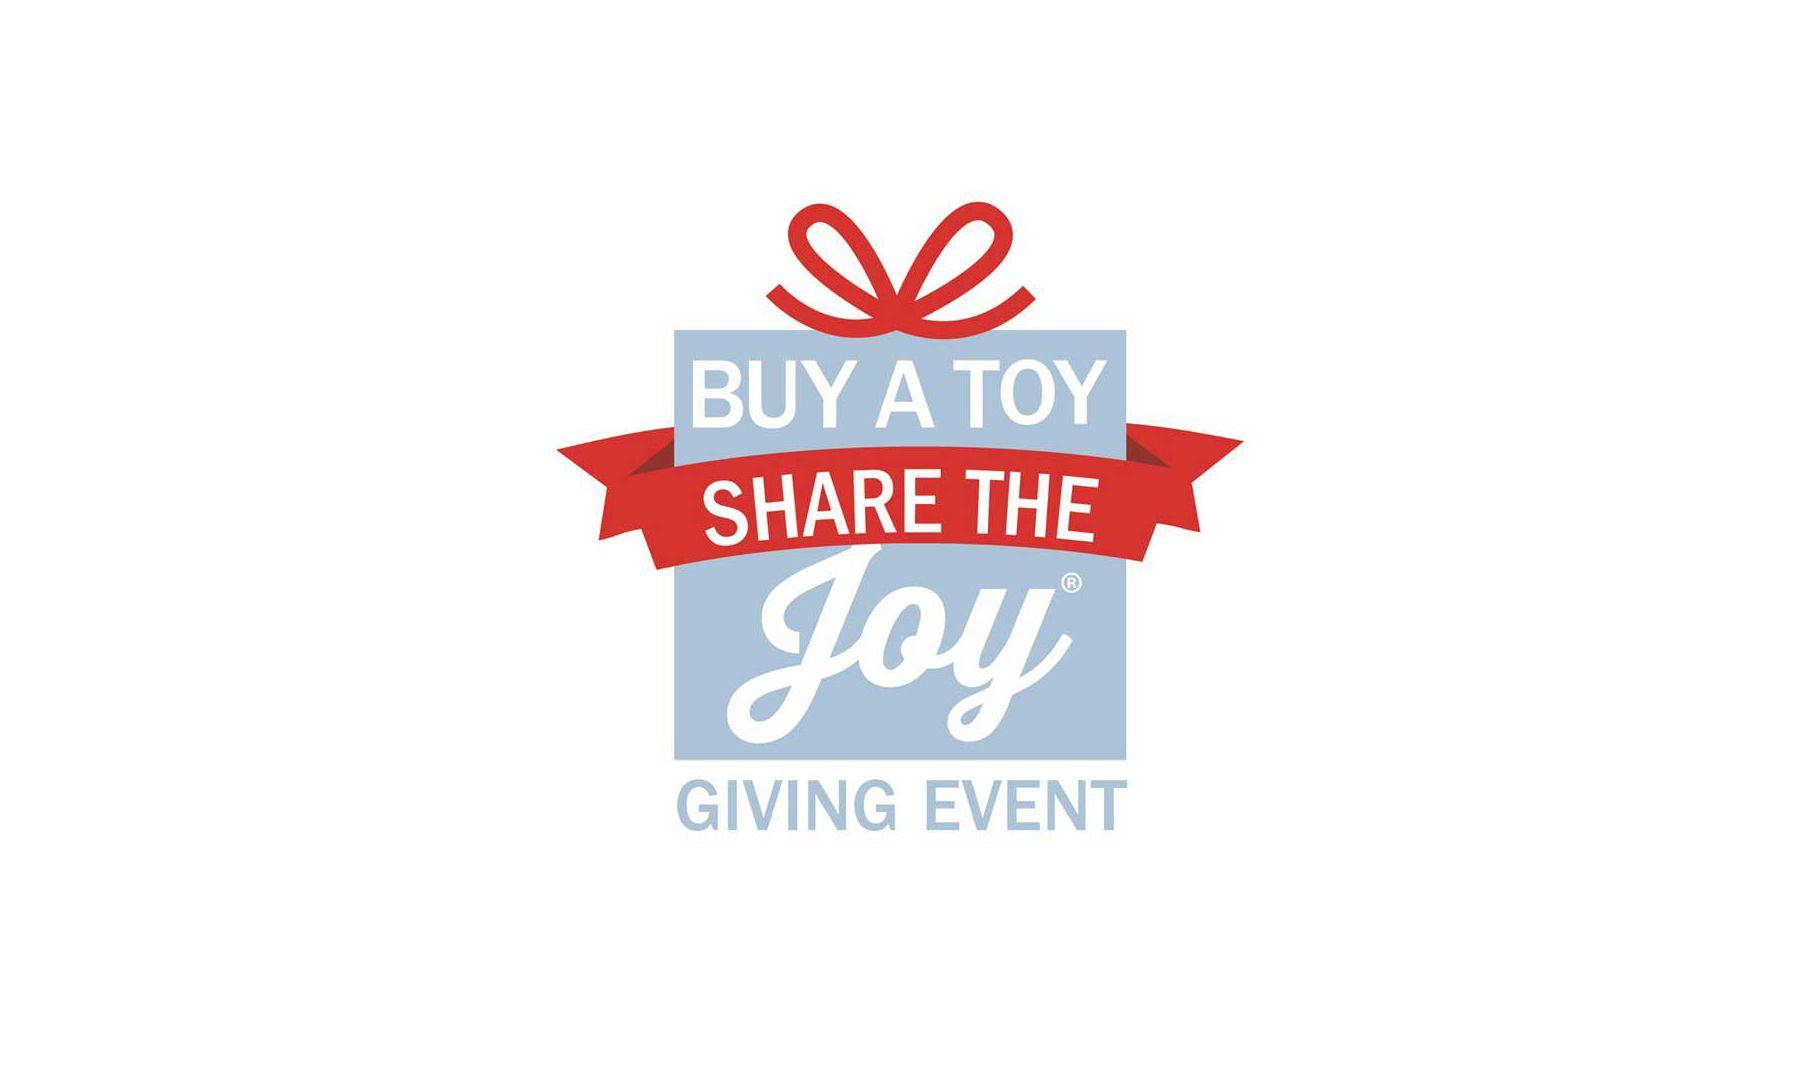 Meijer's Logo - Meijer To Donate Up To $400K Through 'Buy A Toy, Share The Joy'